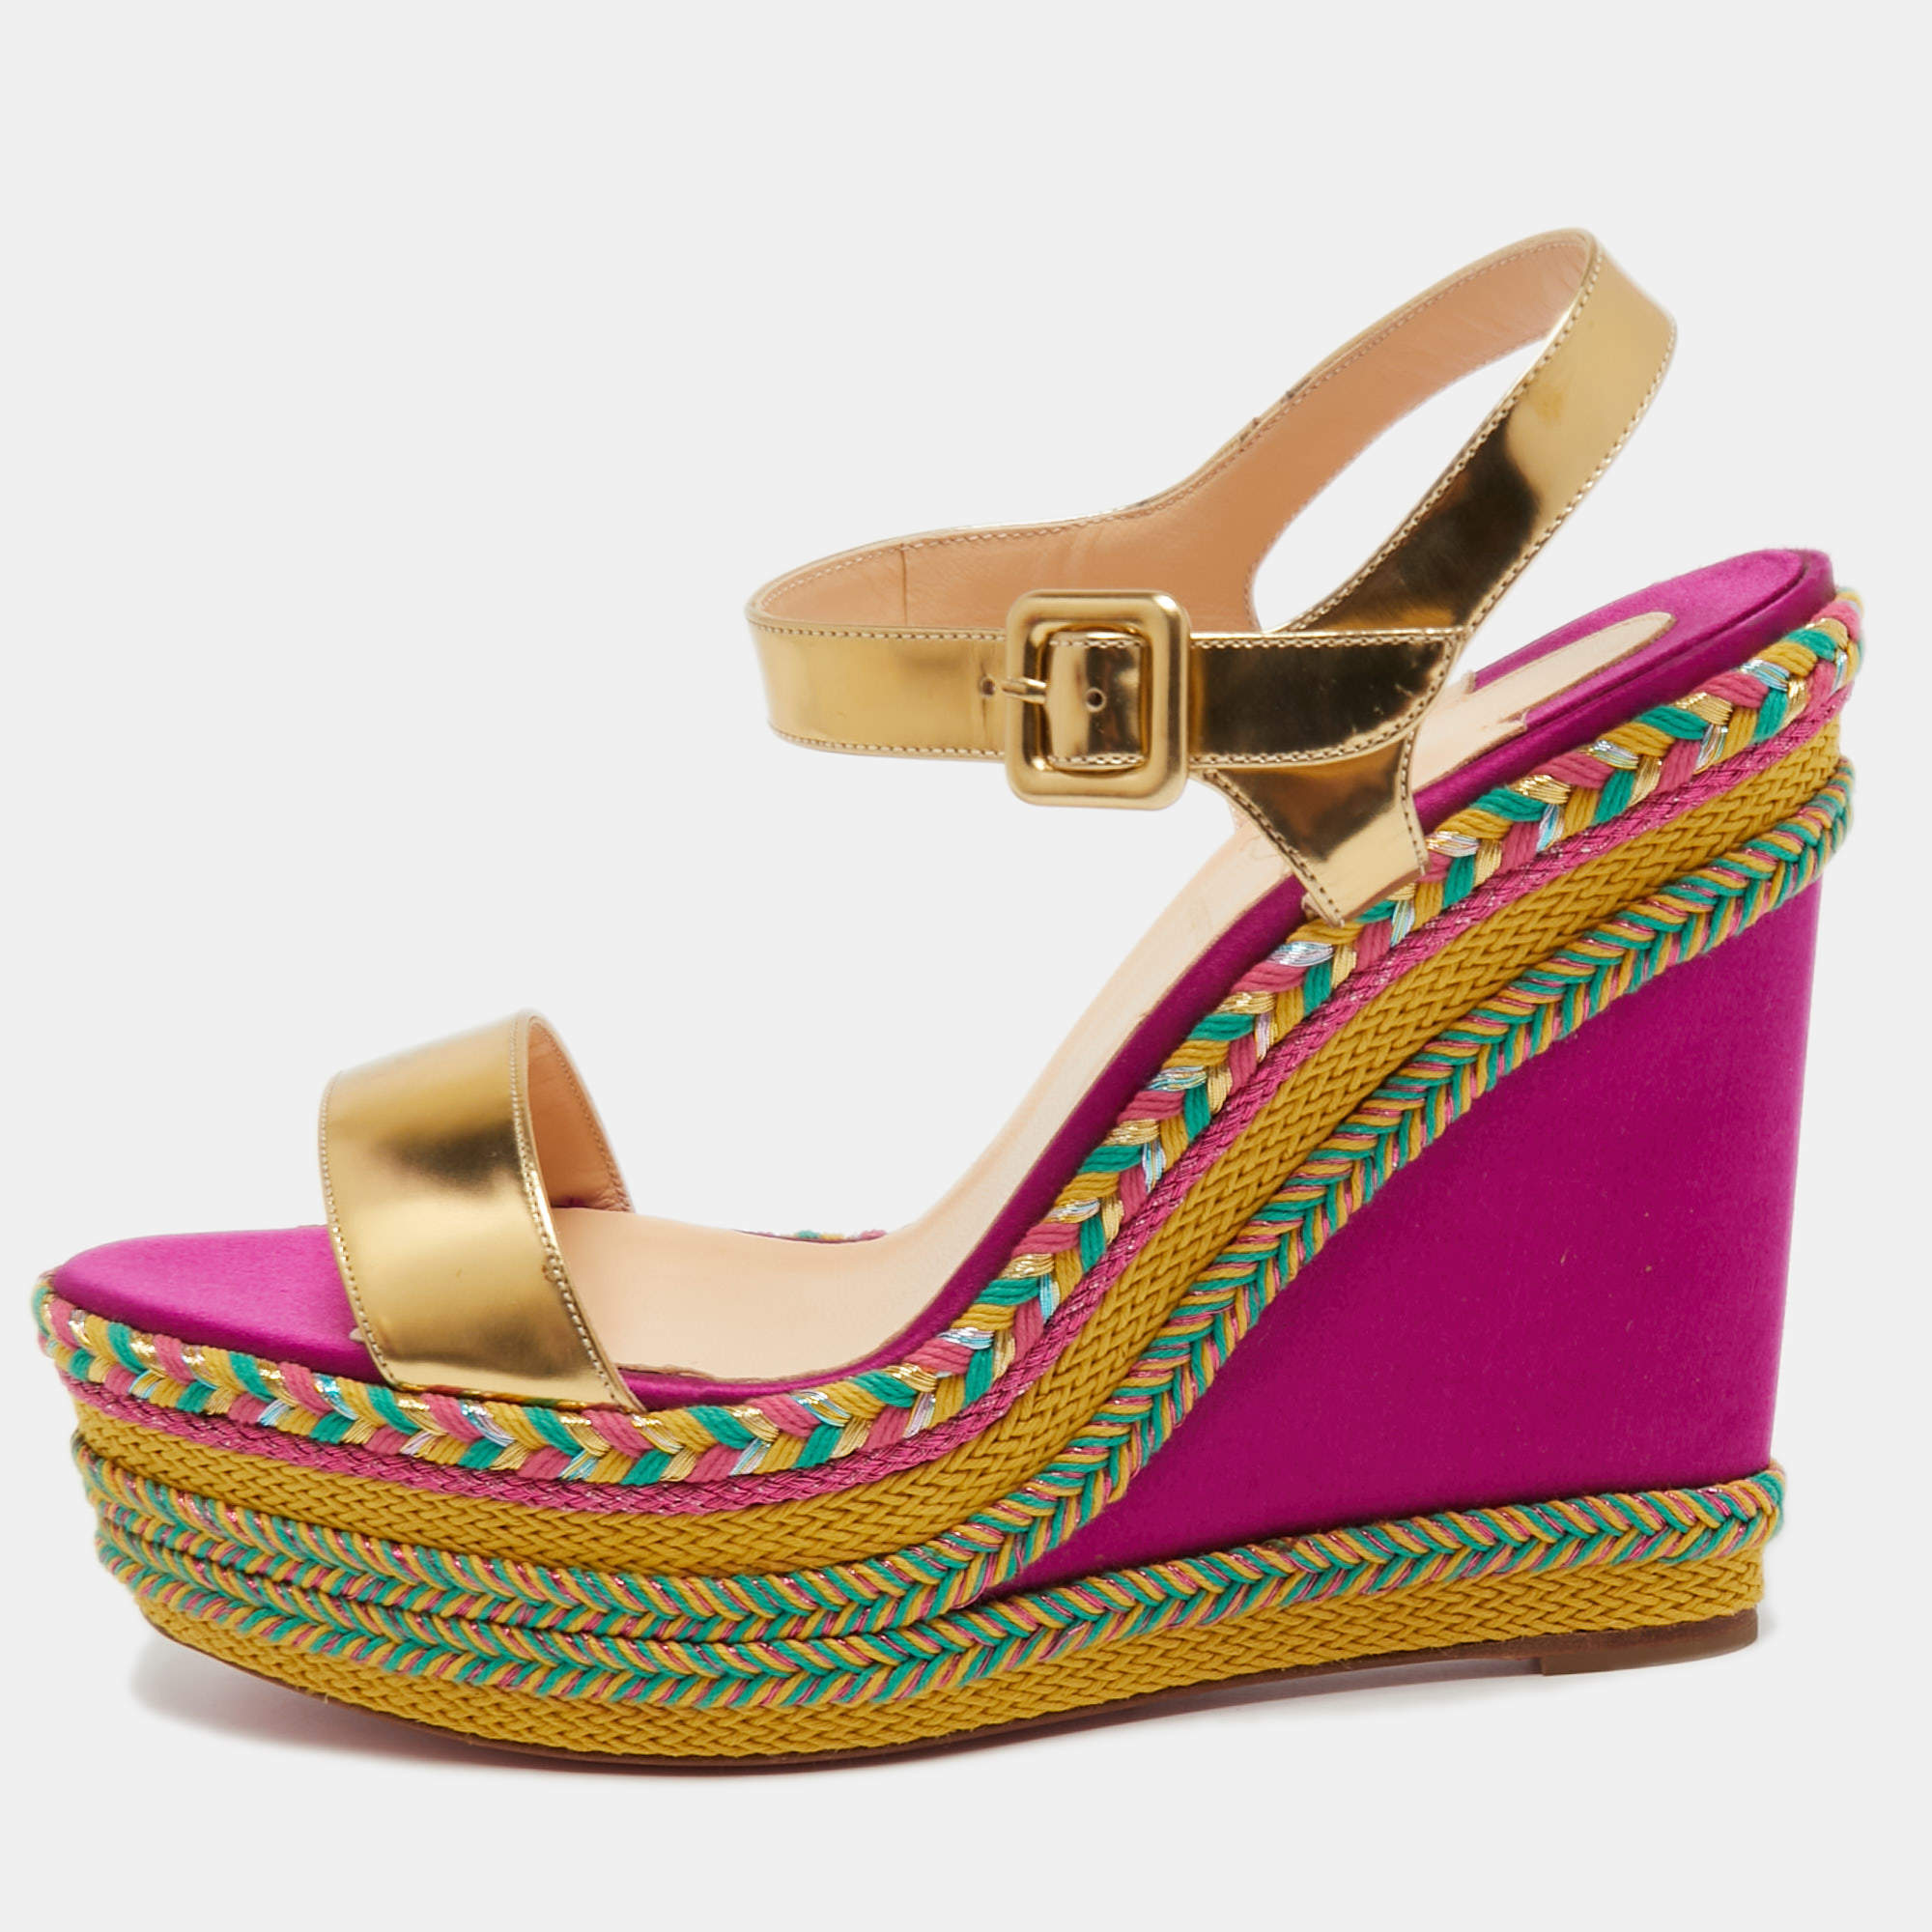 Christian Louboutin Espadrille Bow Wedge Sandals